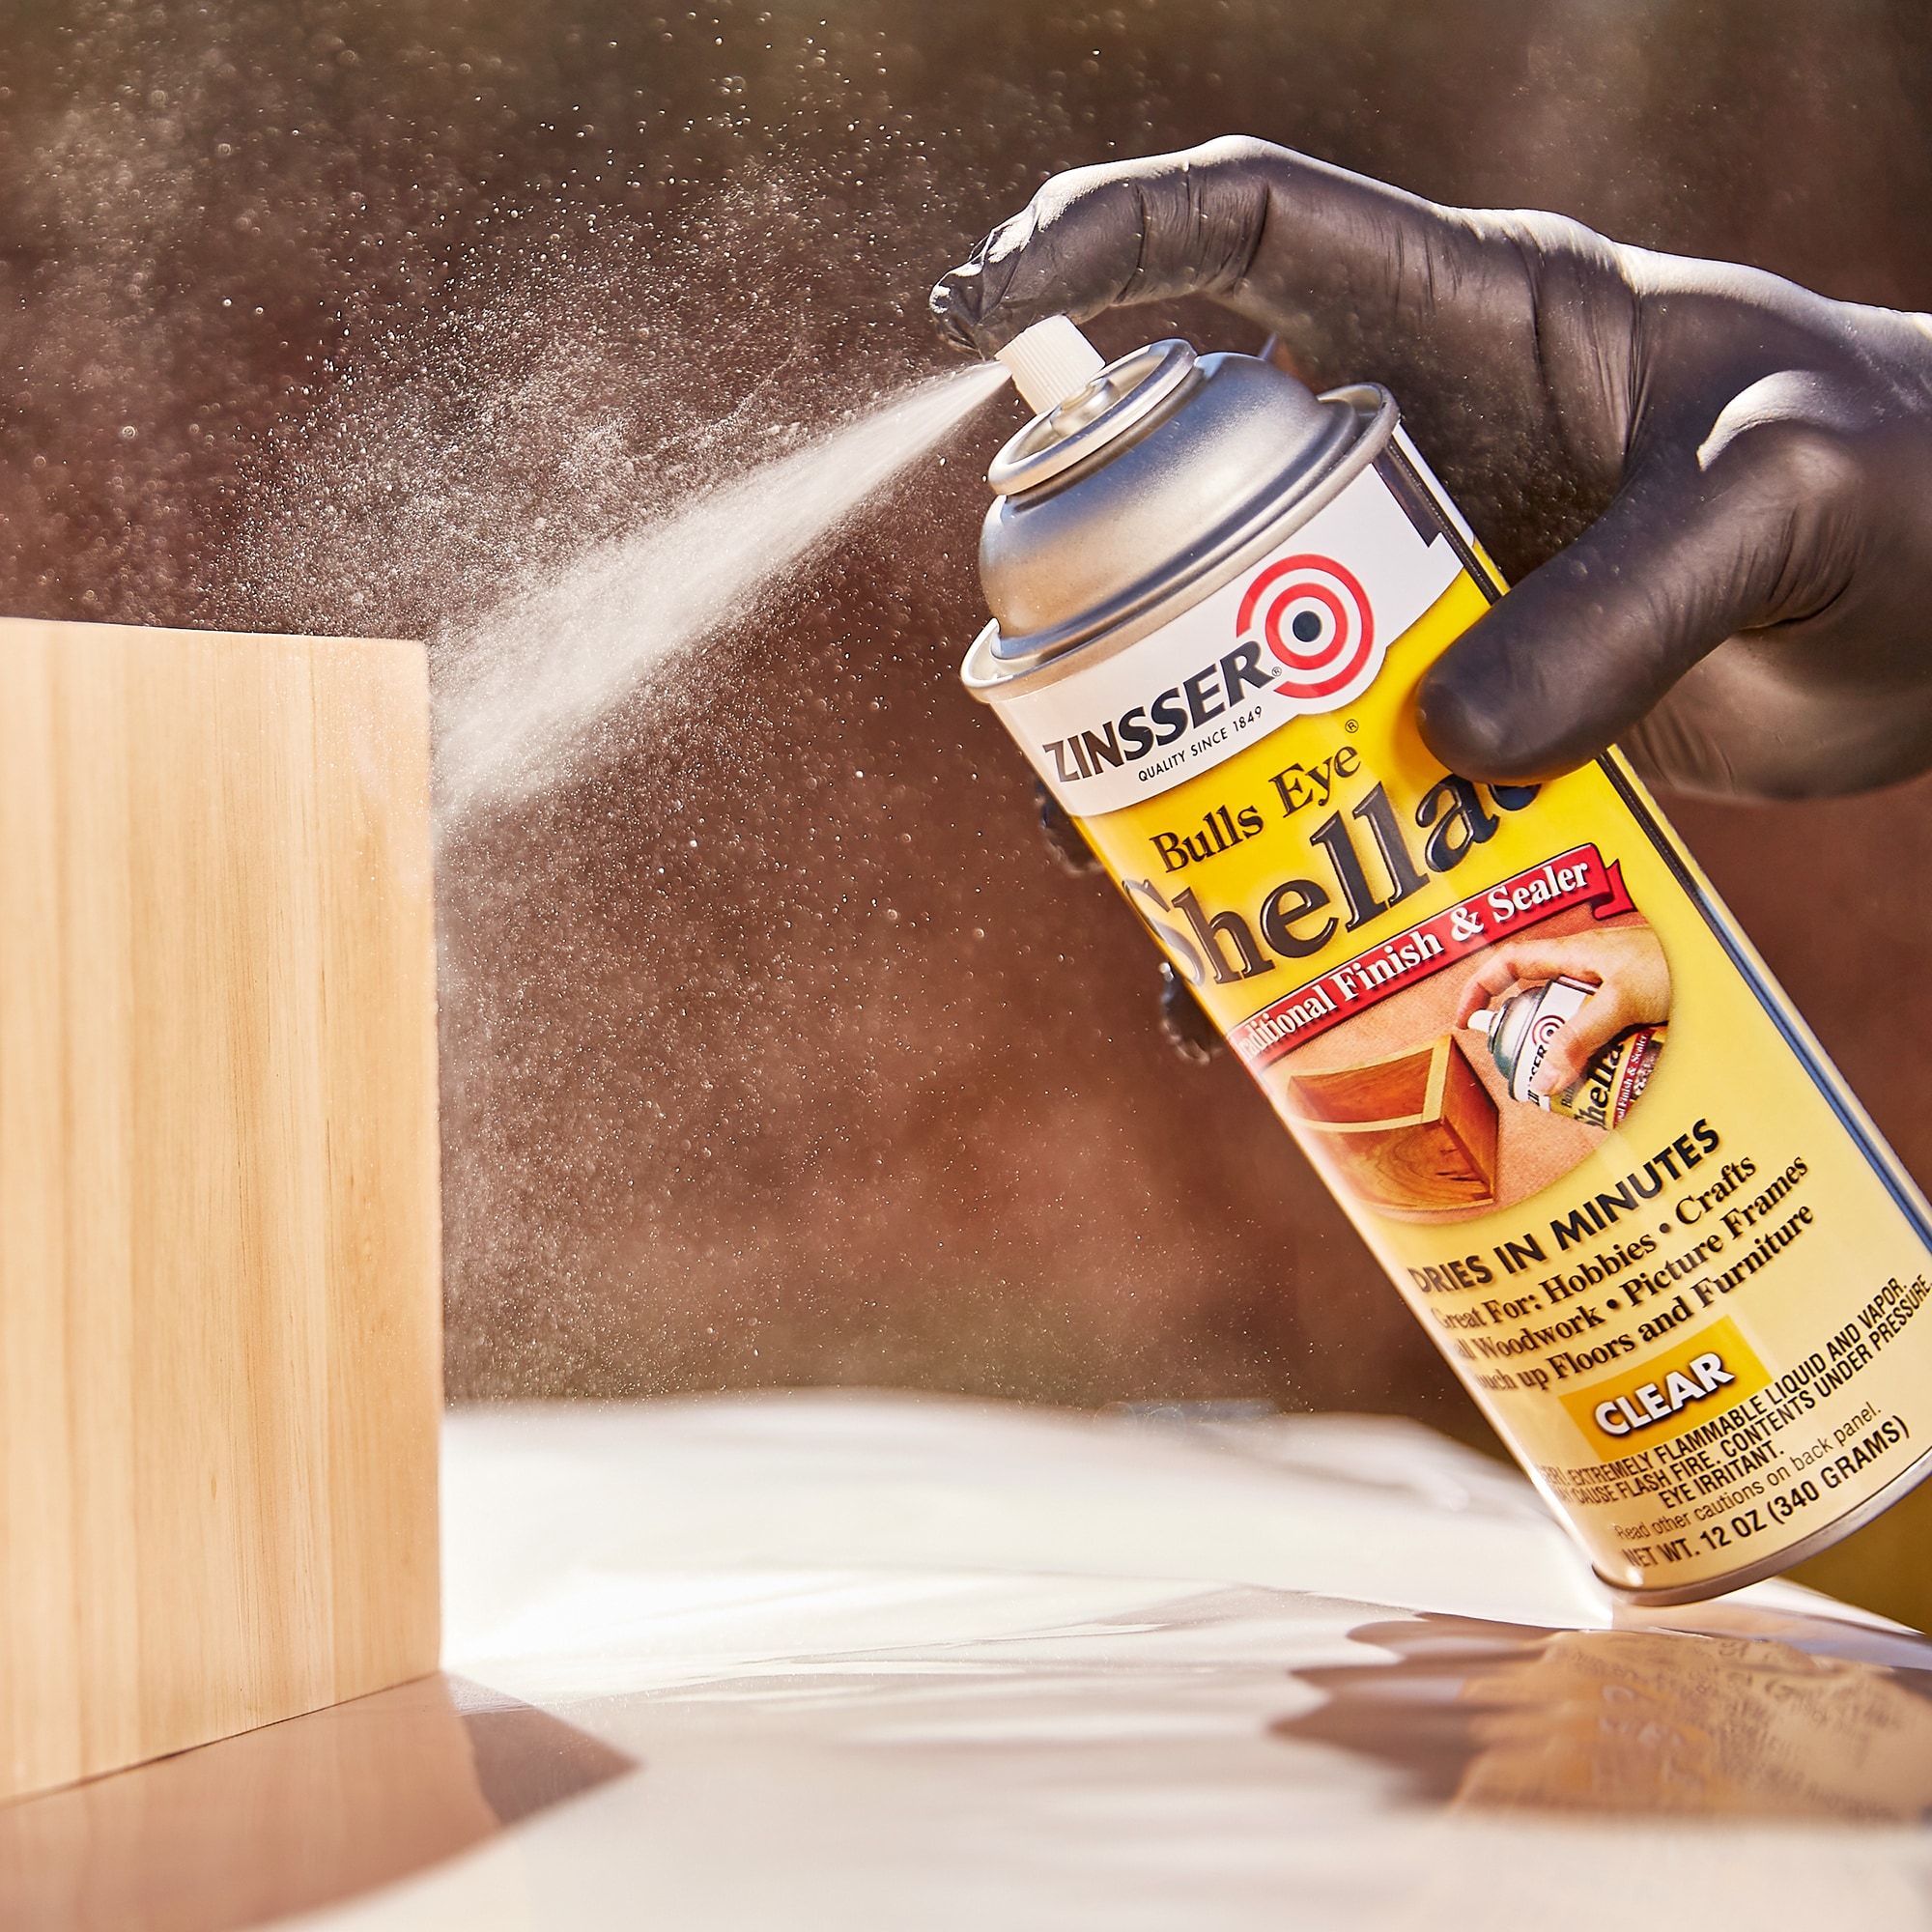 Spray shellac inexpensively, and caveman simple, and perfectly. A $10  sprayer. 